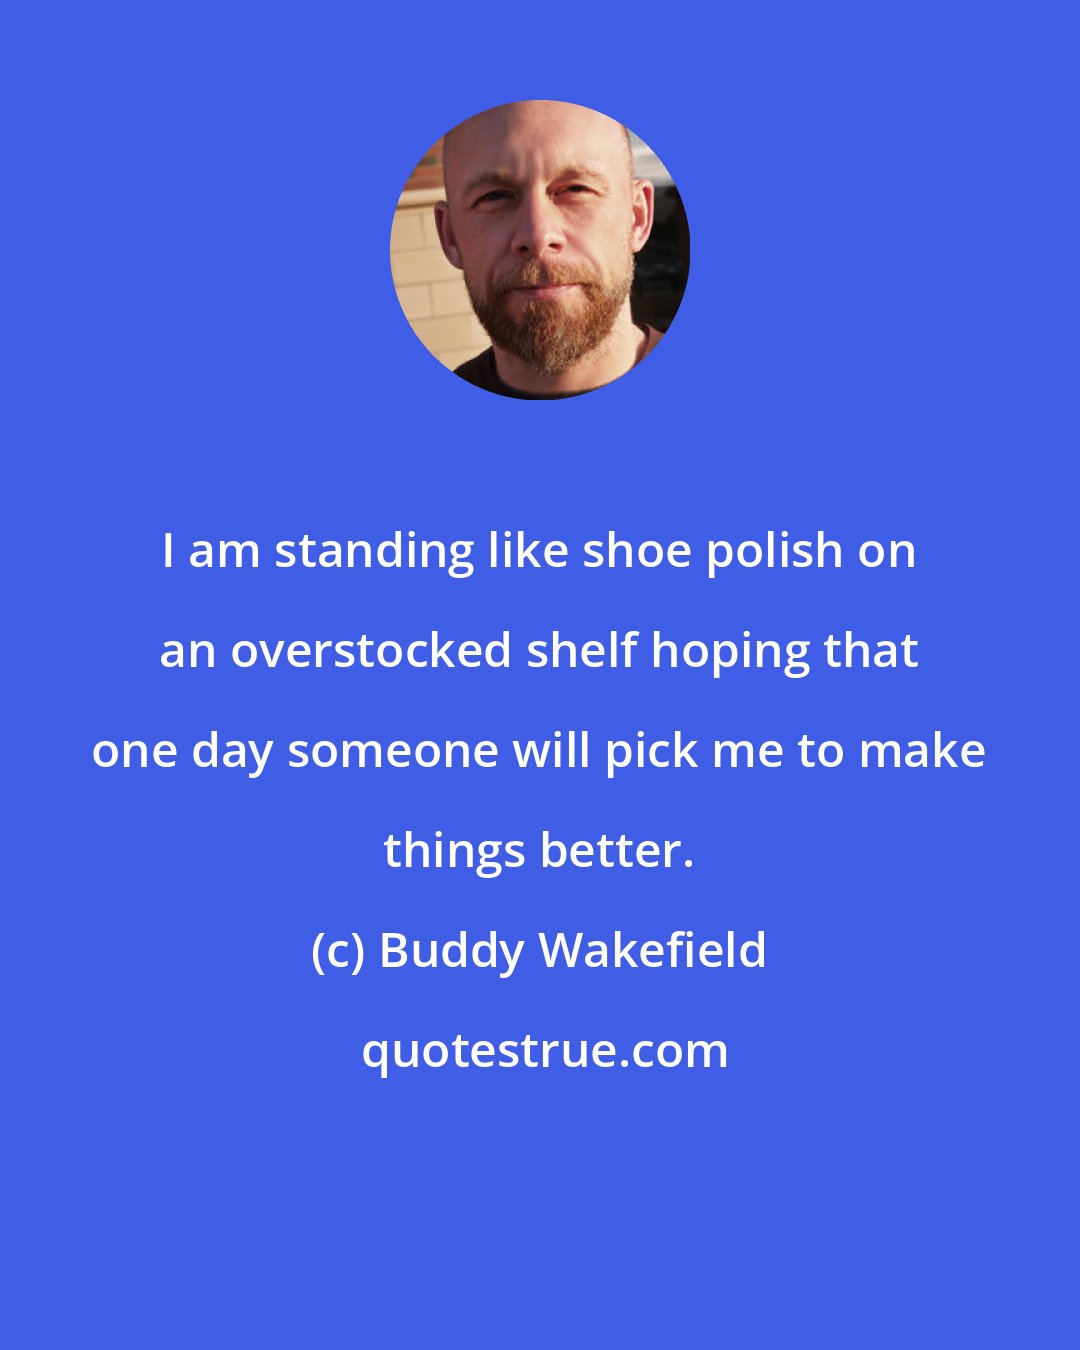 Buddy Wakefield: I am standing like shoe polish on an overstocked shelf hoping that one day someone will pick me to make things better.